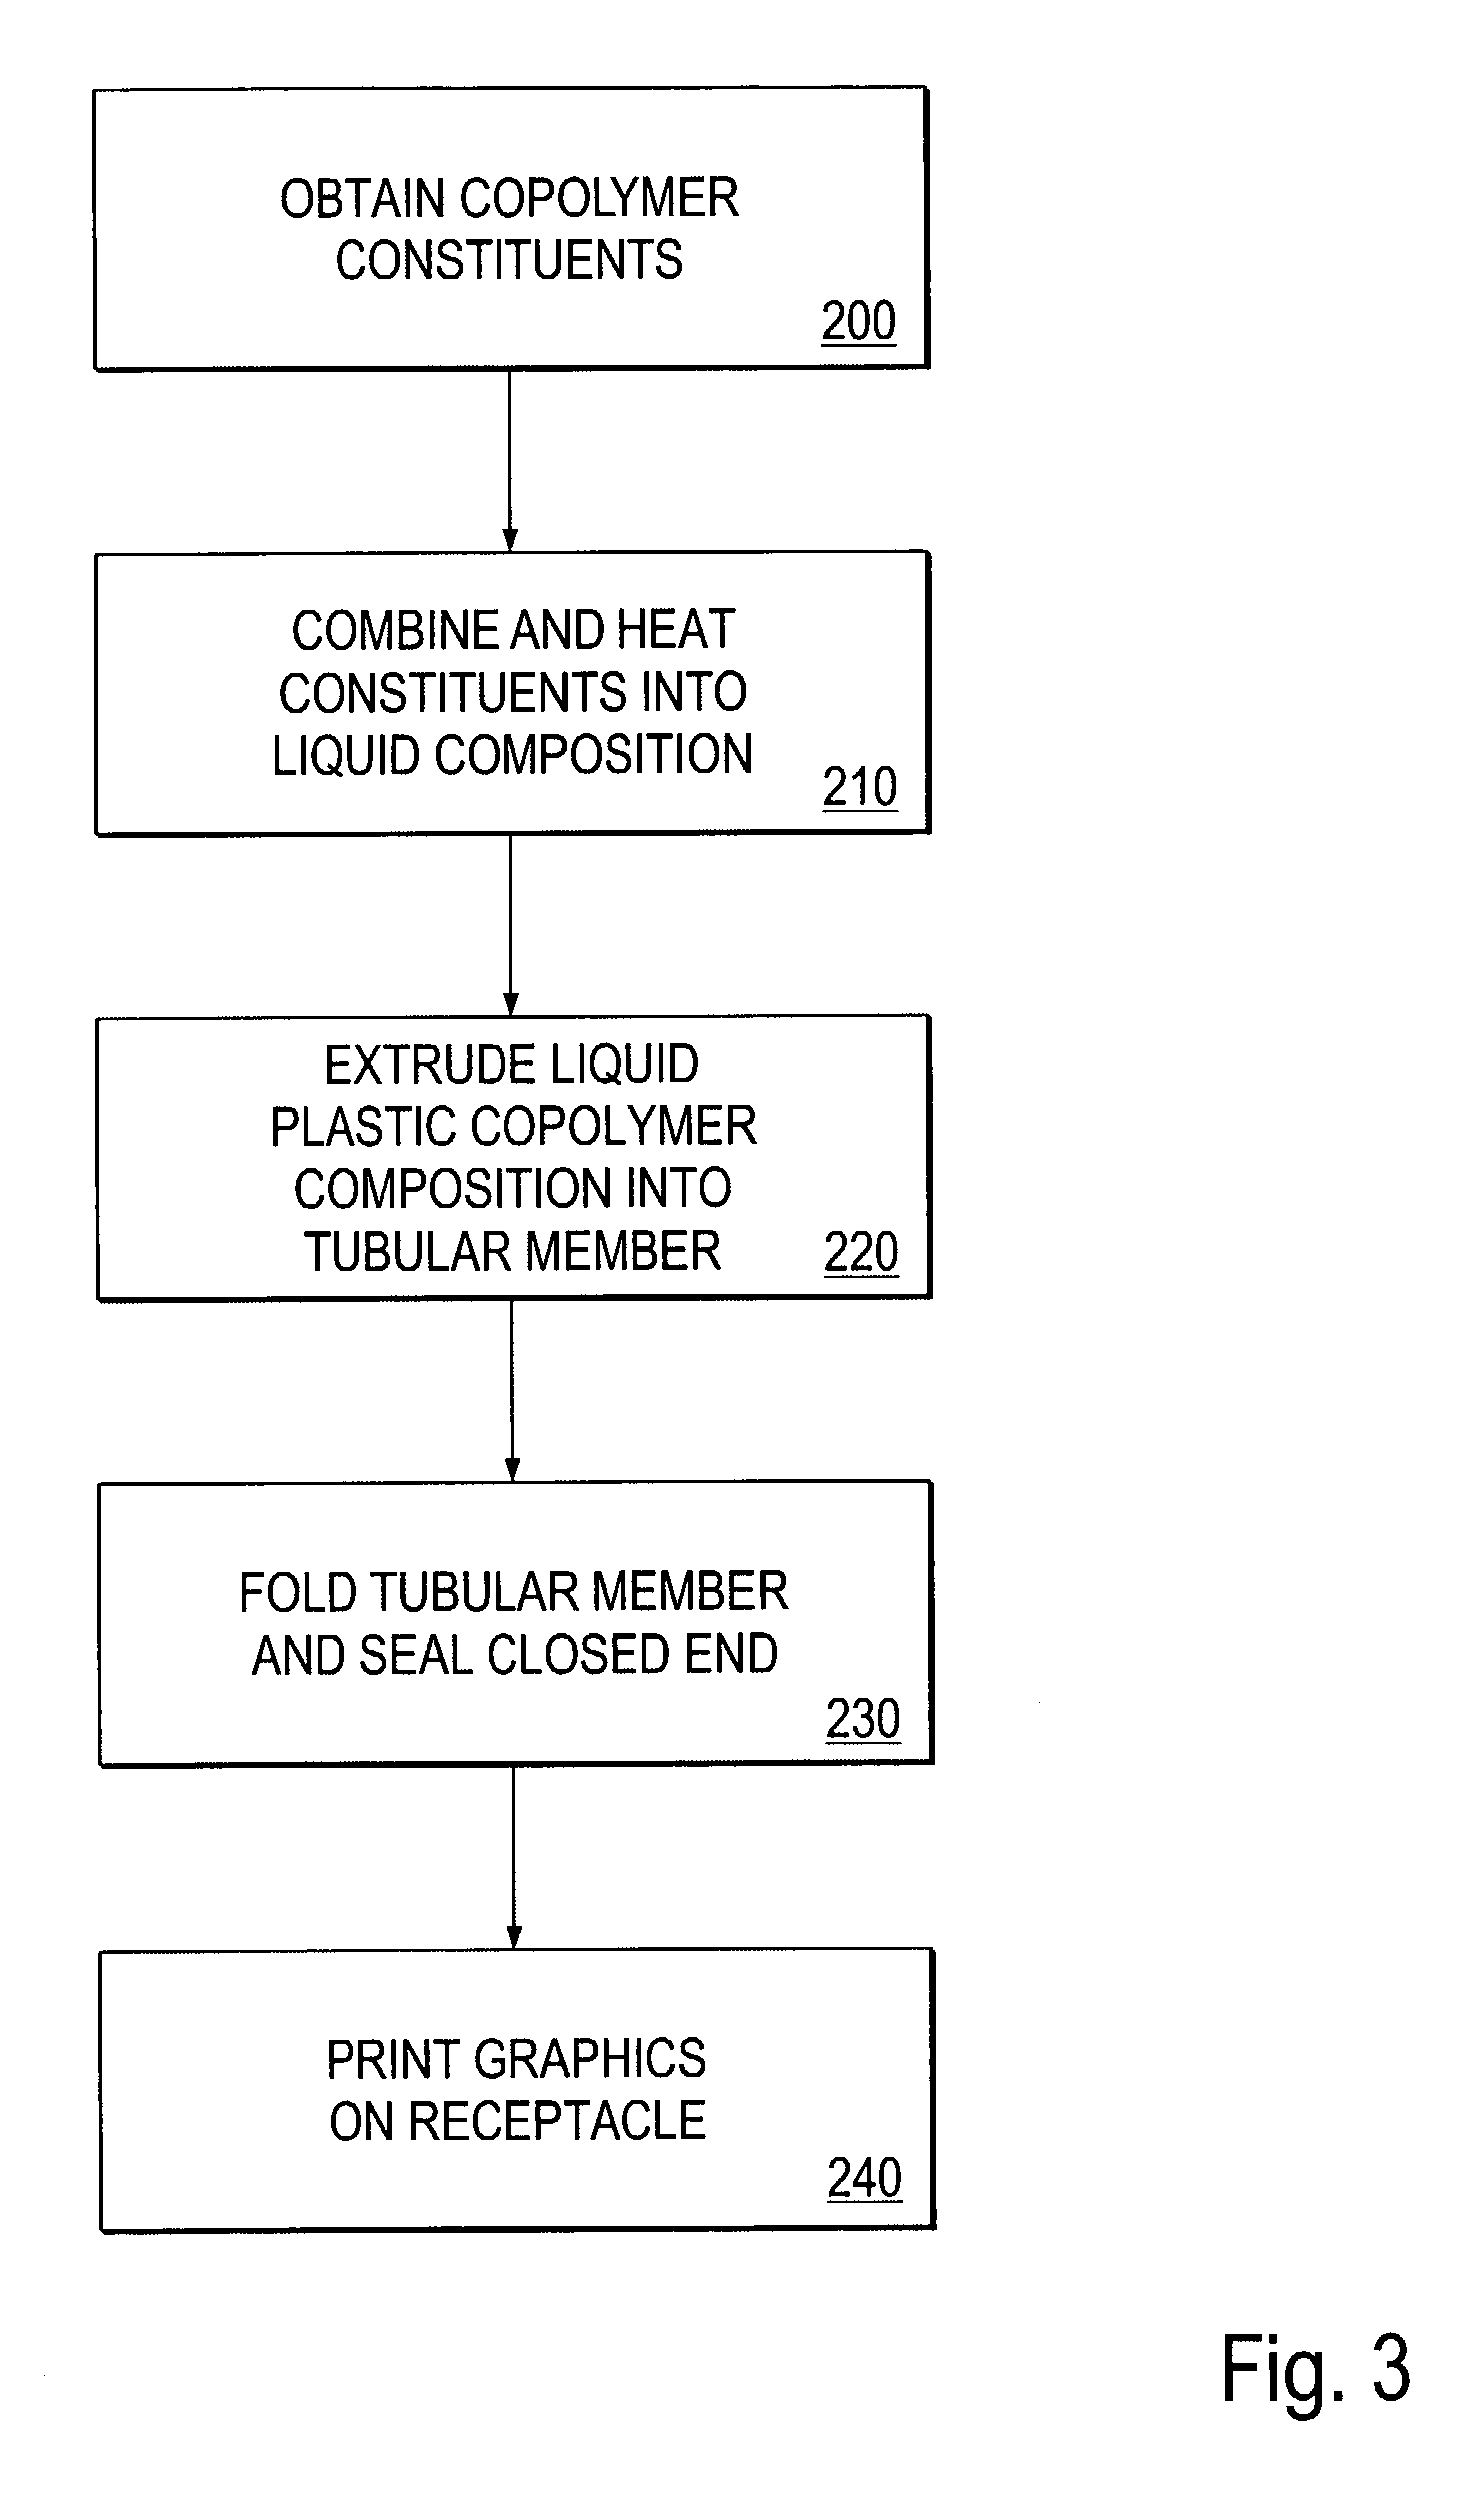 Method for making a seamless plastic motion discomfort receptacle